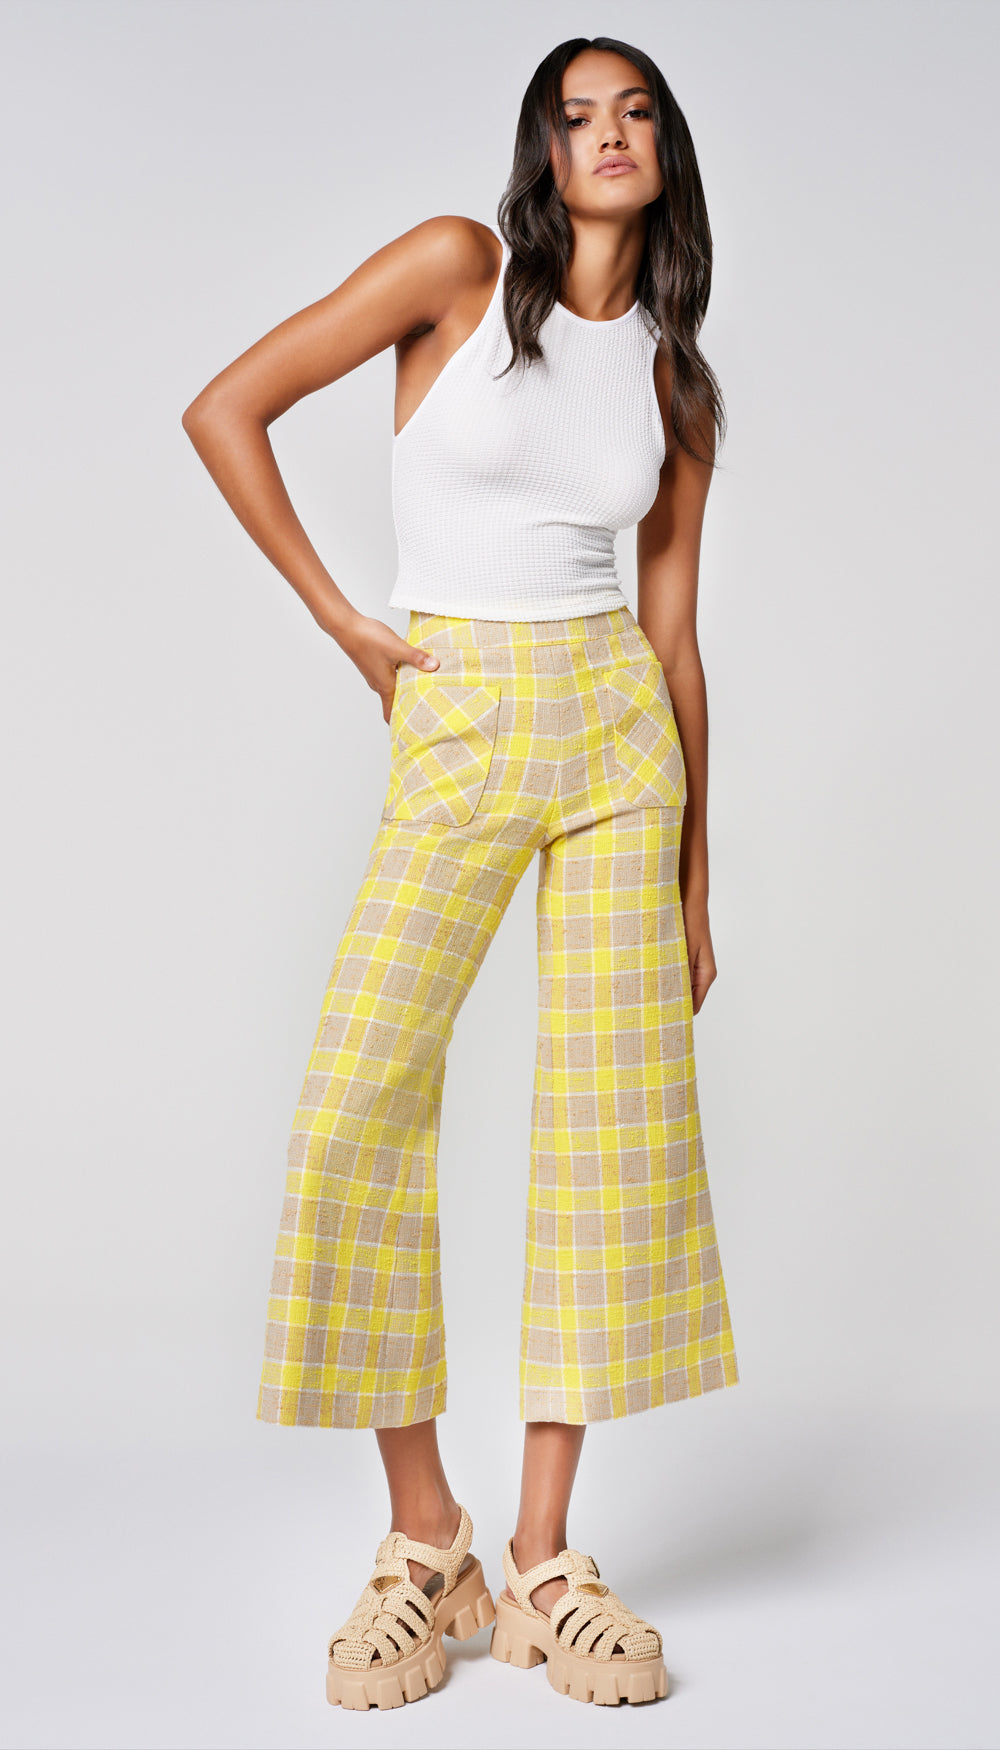 A woman in a yellow check pant and white tank.